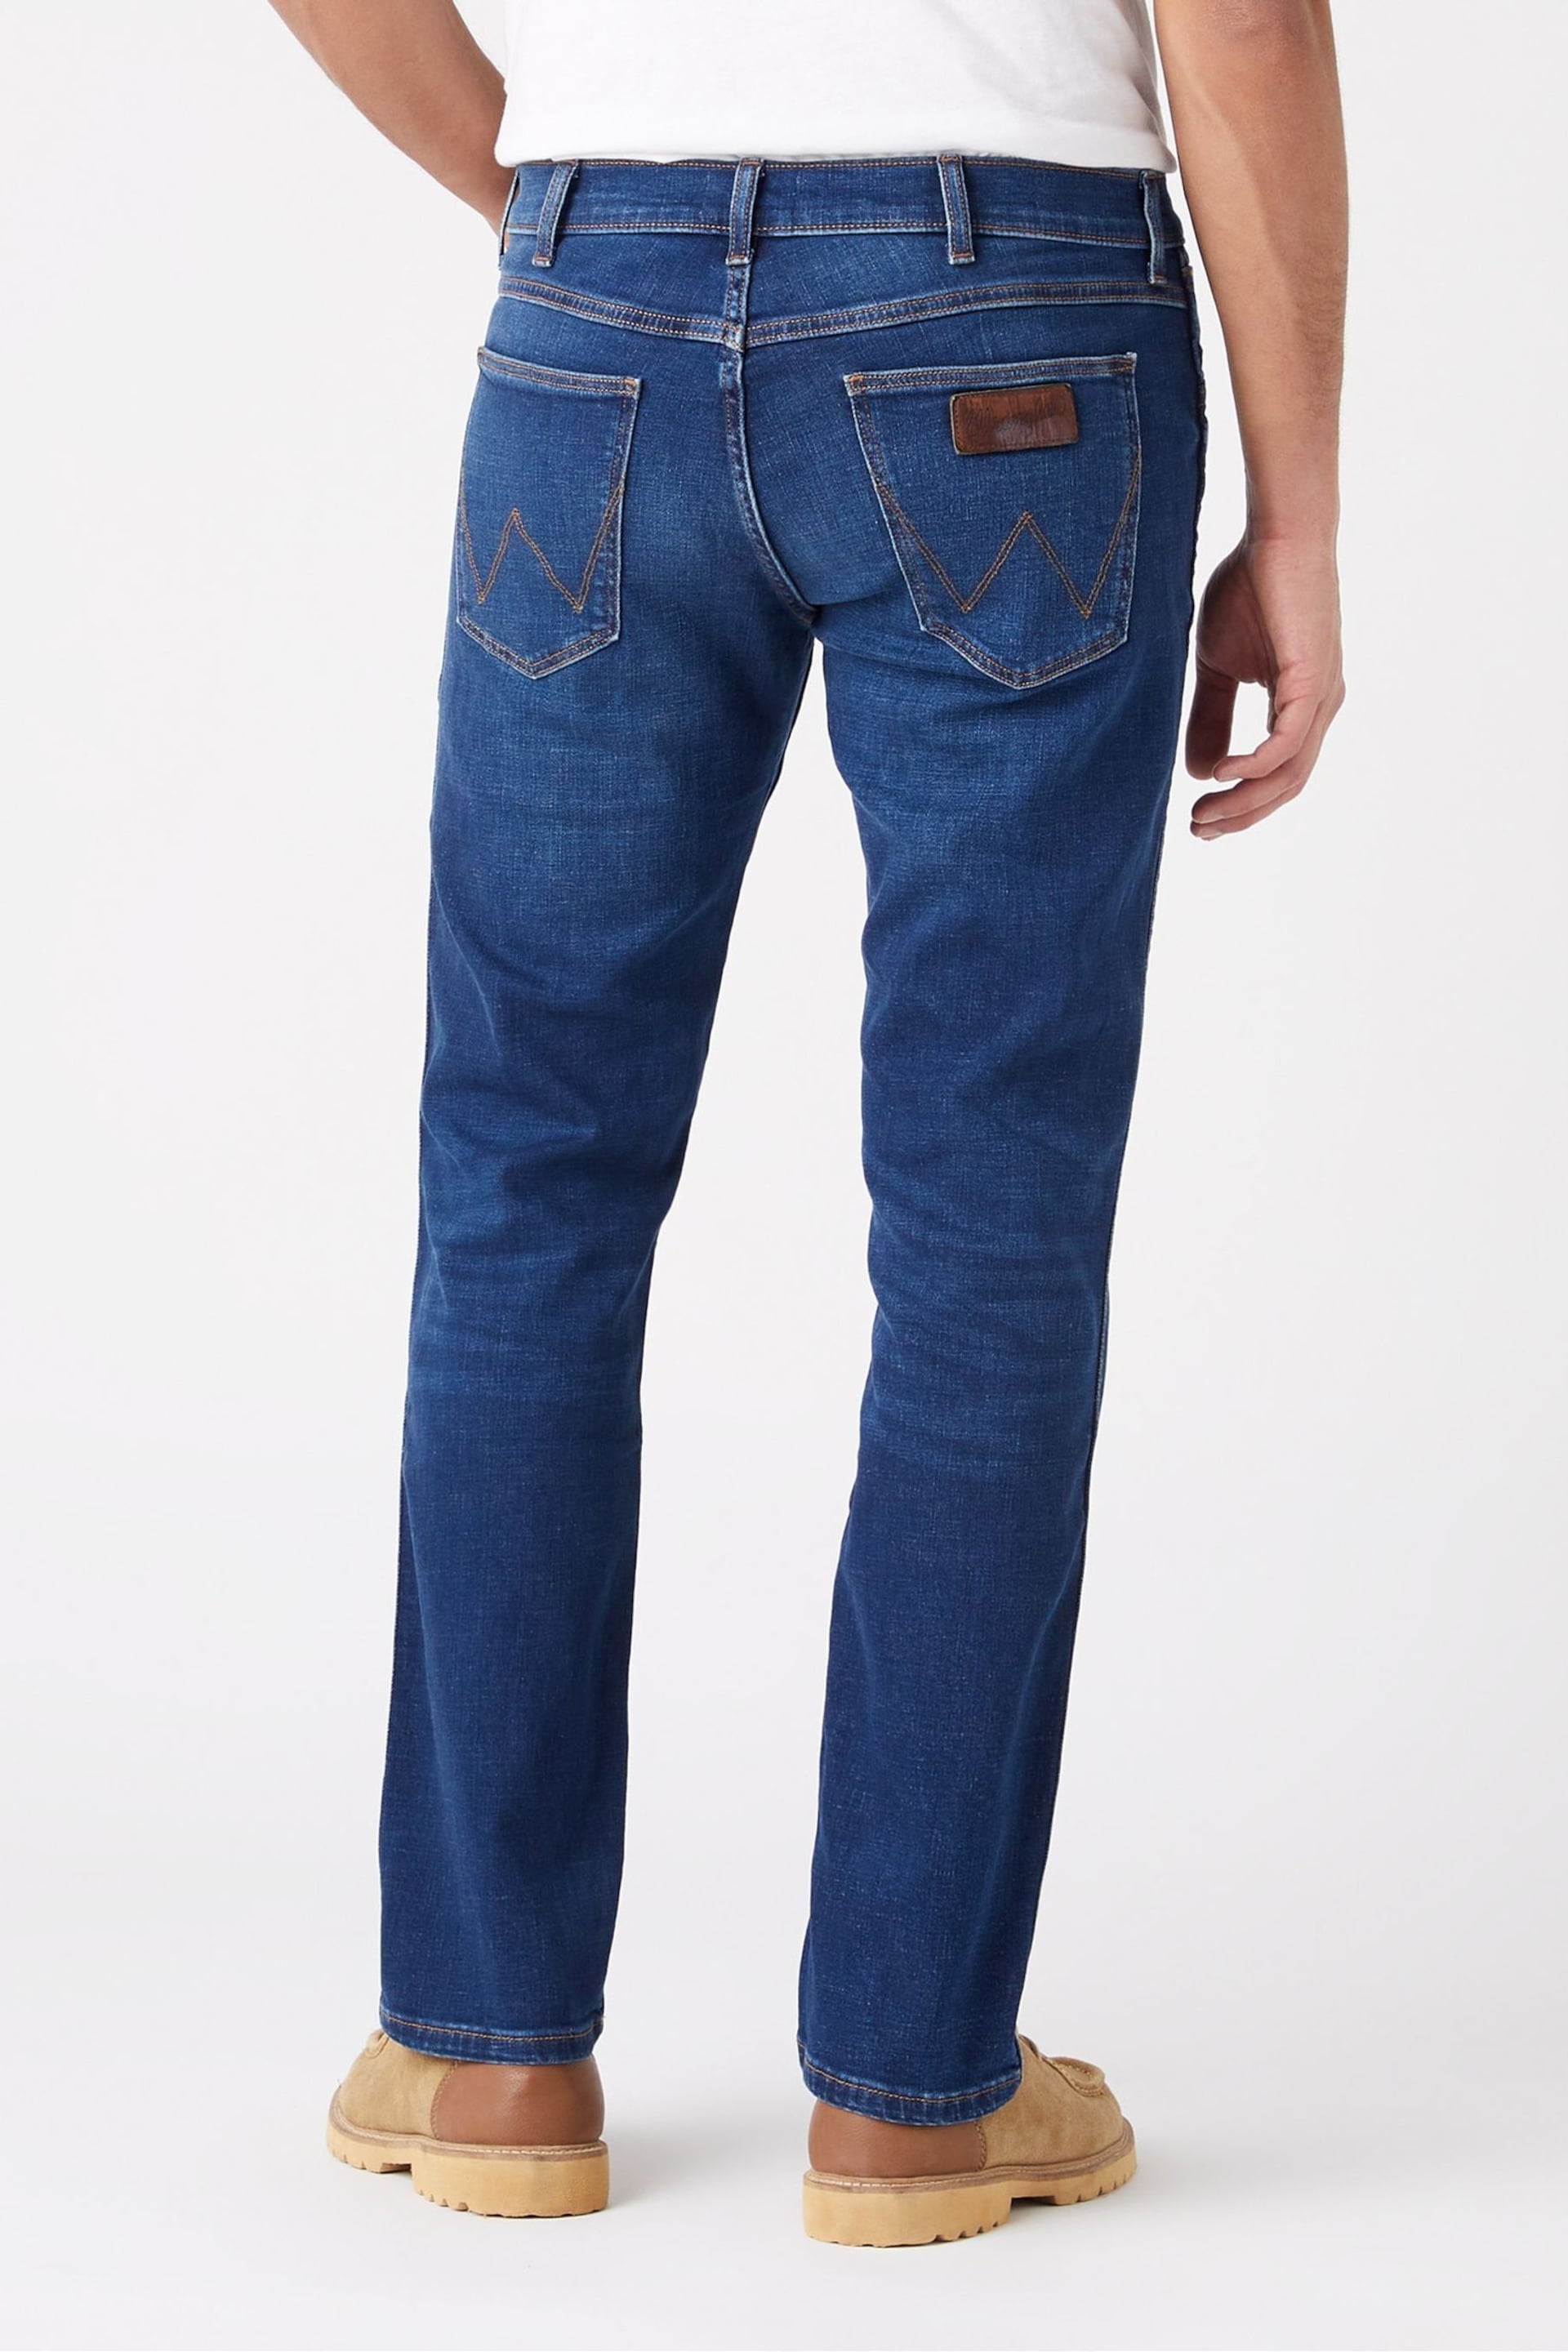 Wrangler Greensborough Straight Fit Jeans - Image 2 of 7